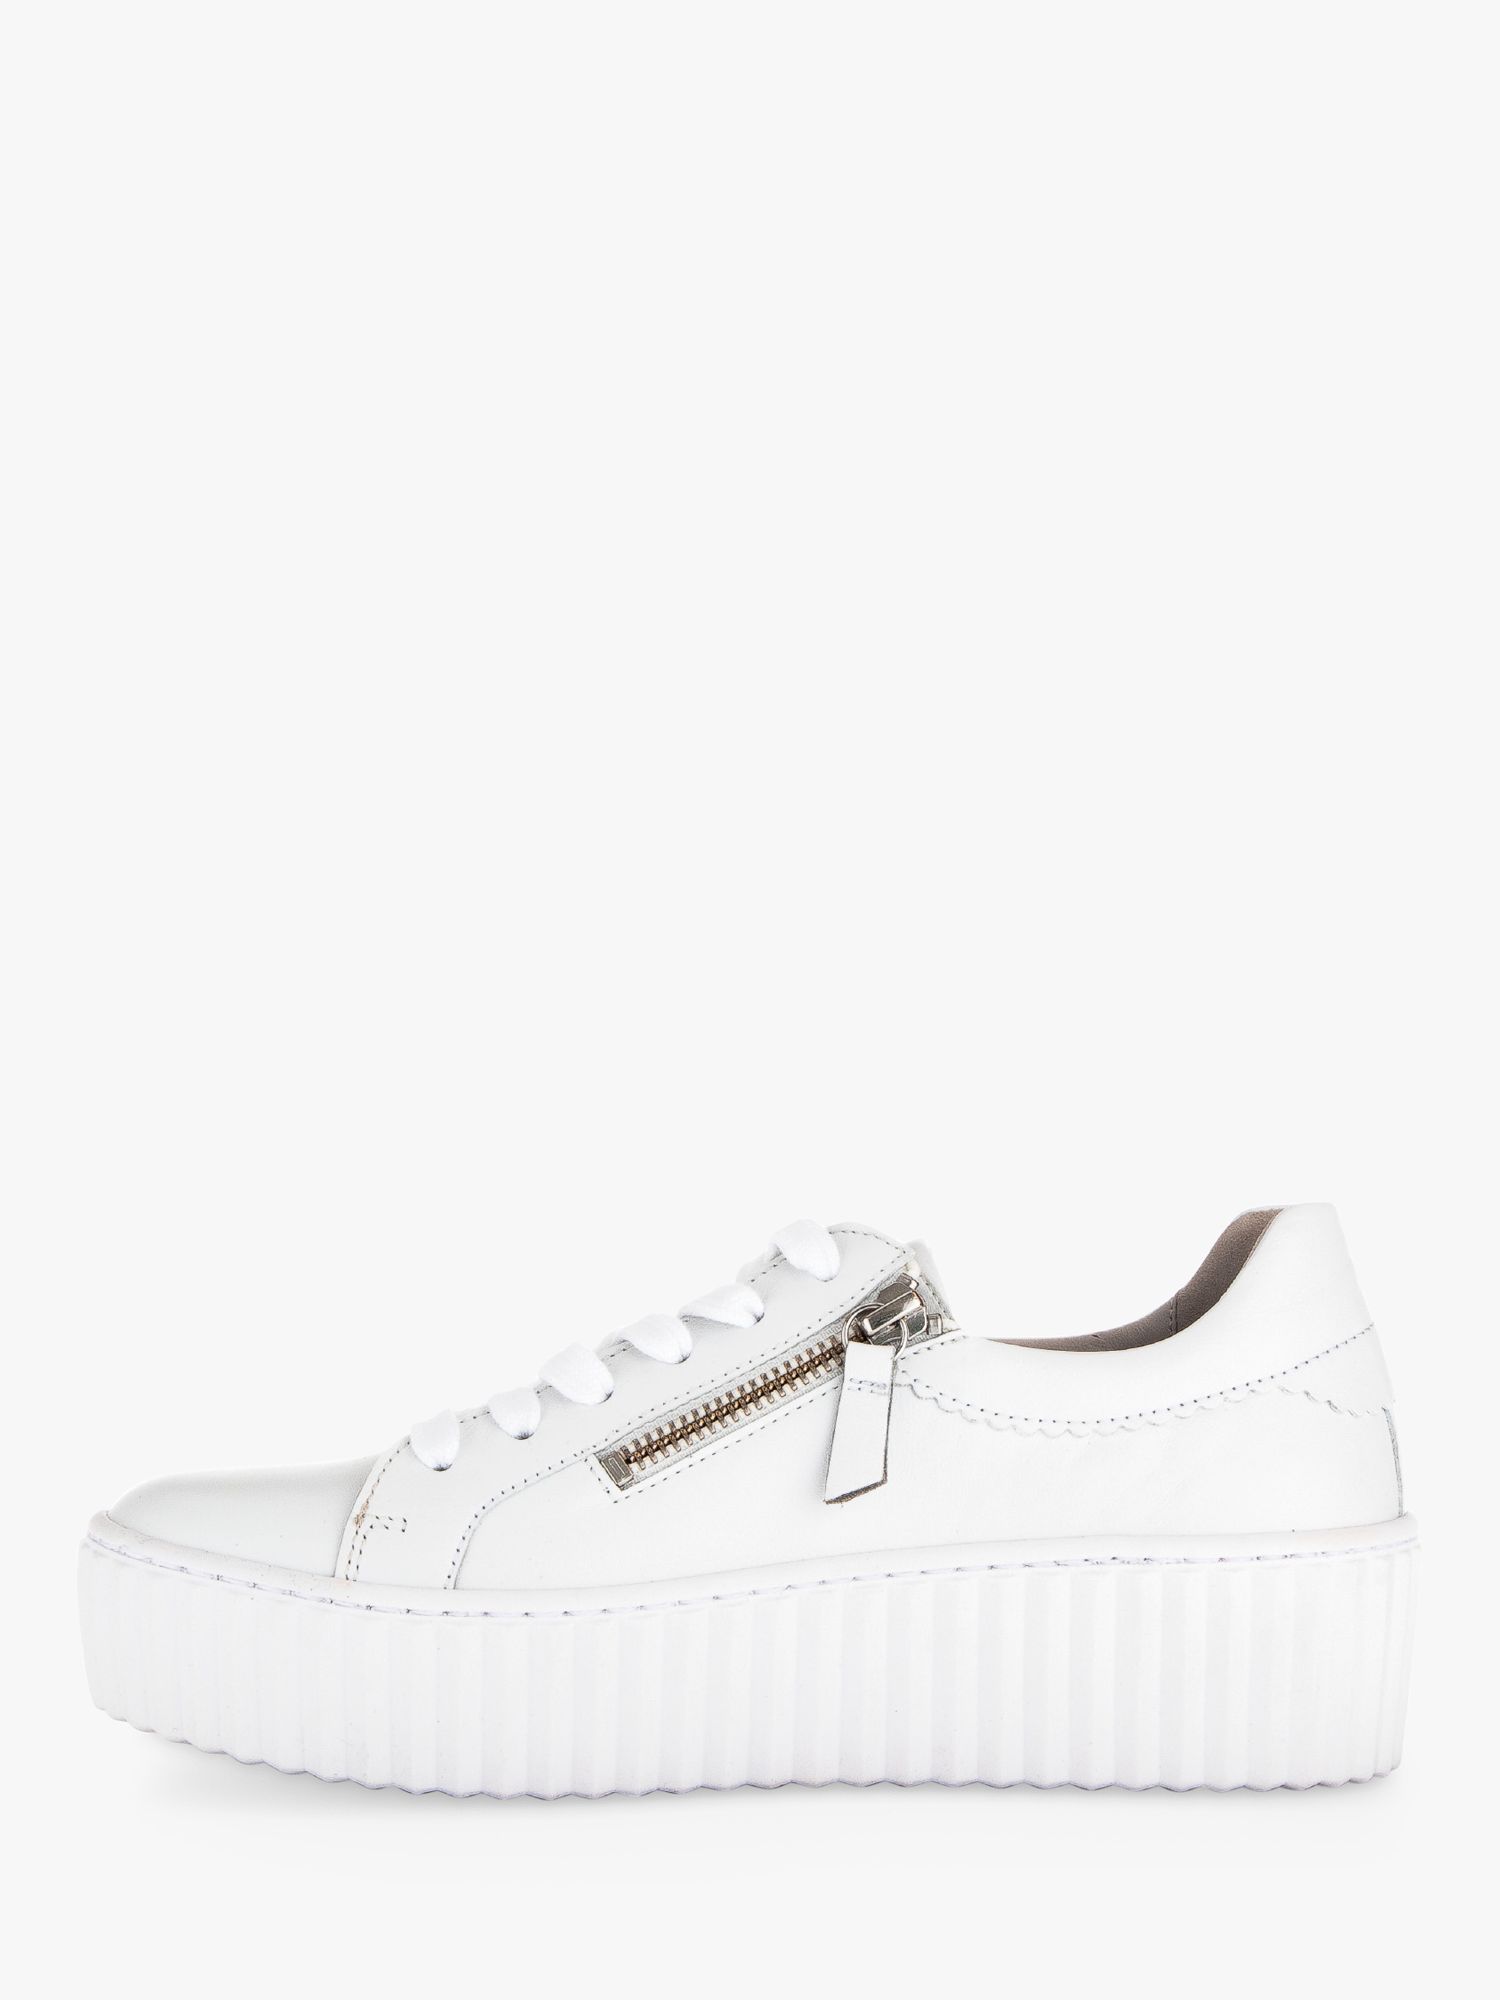 Gabor Dolly Leather Zip Detail Trainers, White, 6